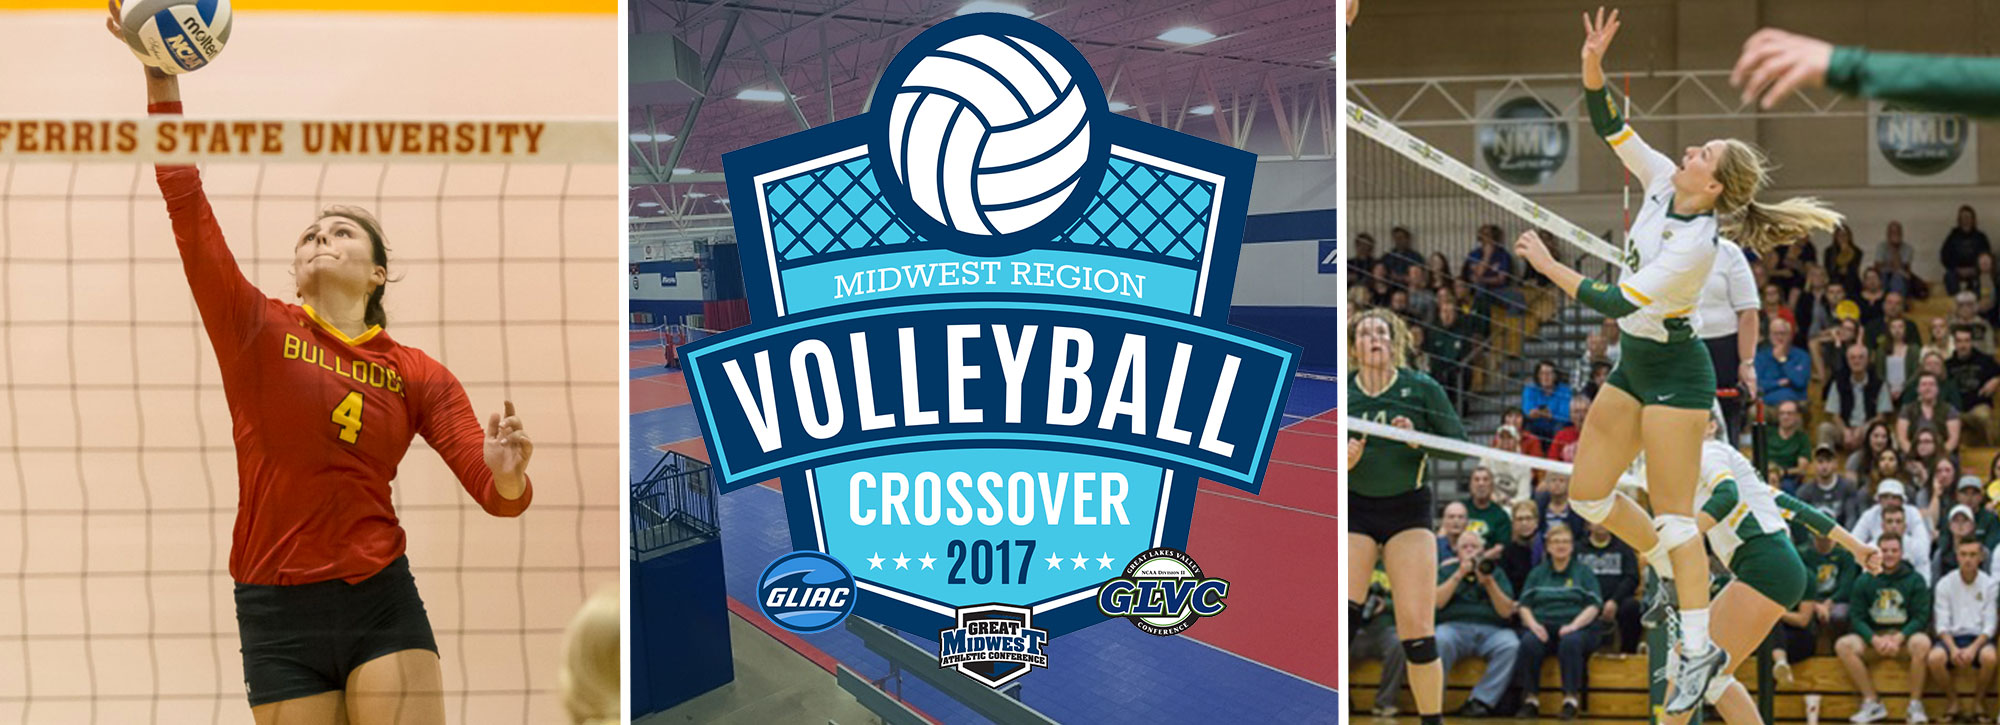 Stage Set for 2017 Midwest Region Volleyball Crossover Weekend